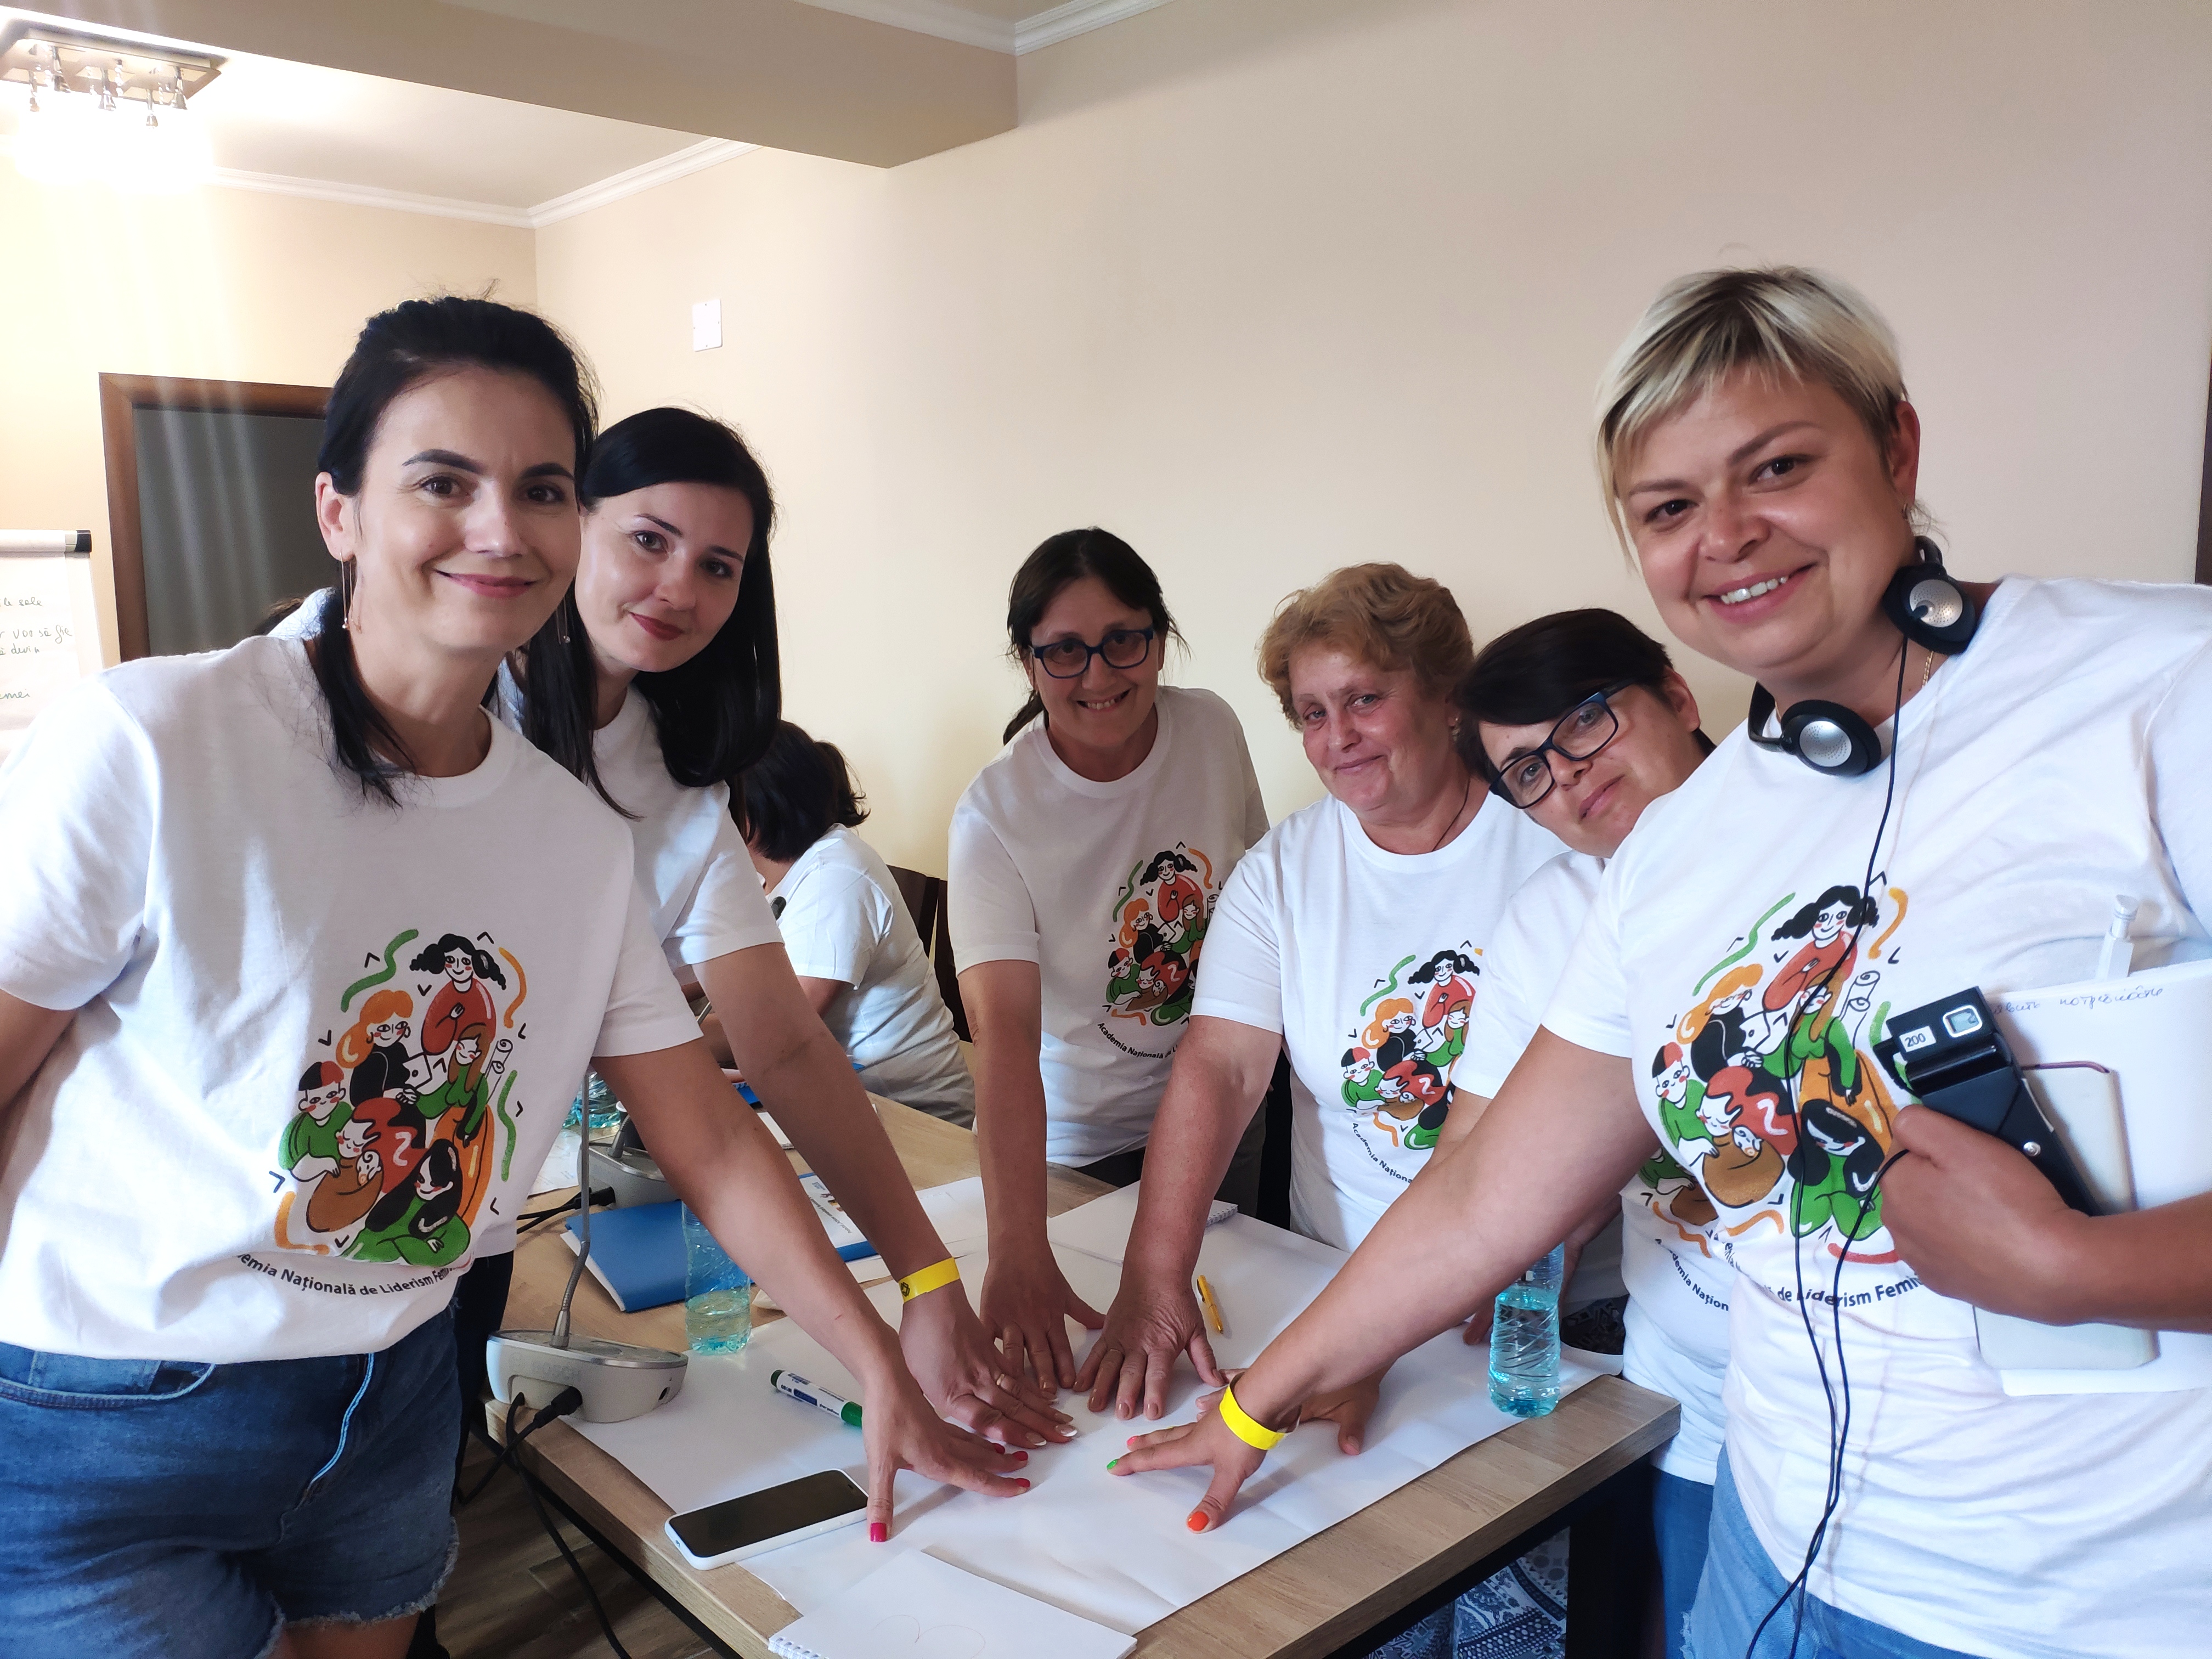 Members of the Women Leaders Academy for Peace developing a community project aimed at vulnerable women, with Irina Cebanenco on the far right. Photo: Doina Chiosa/Gender-Centru